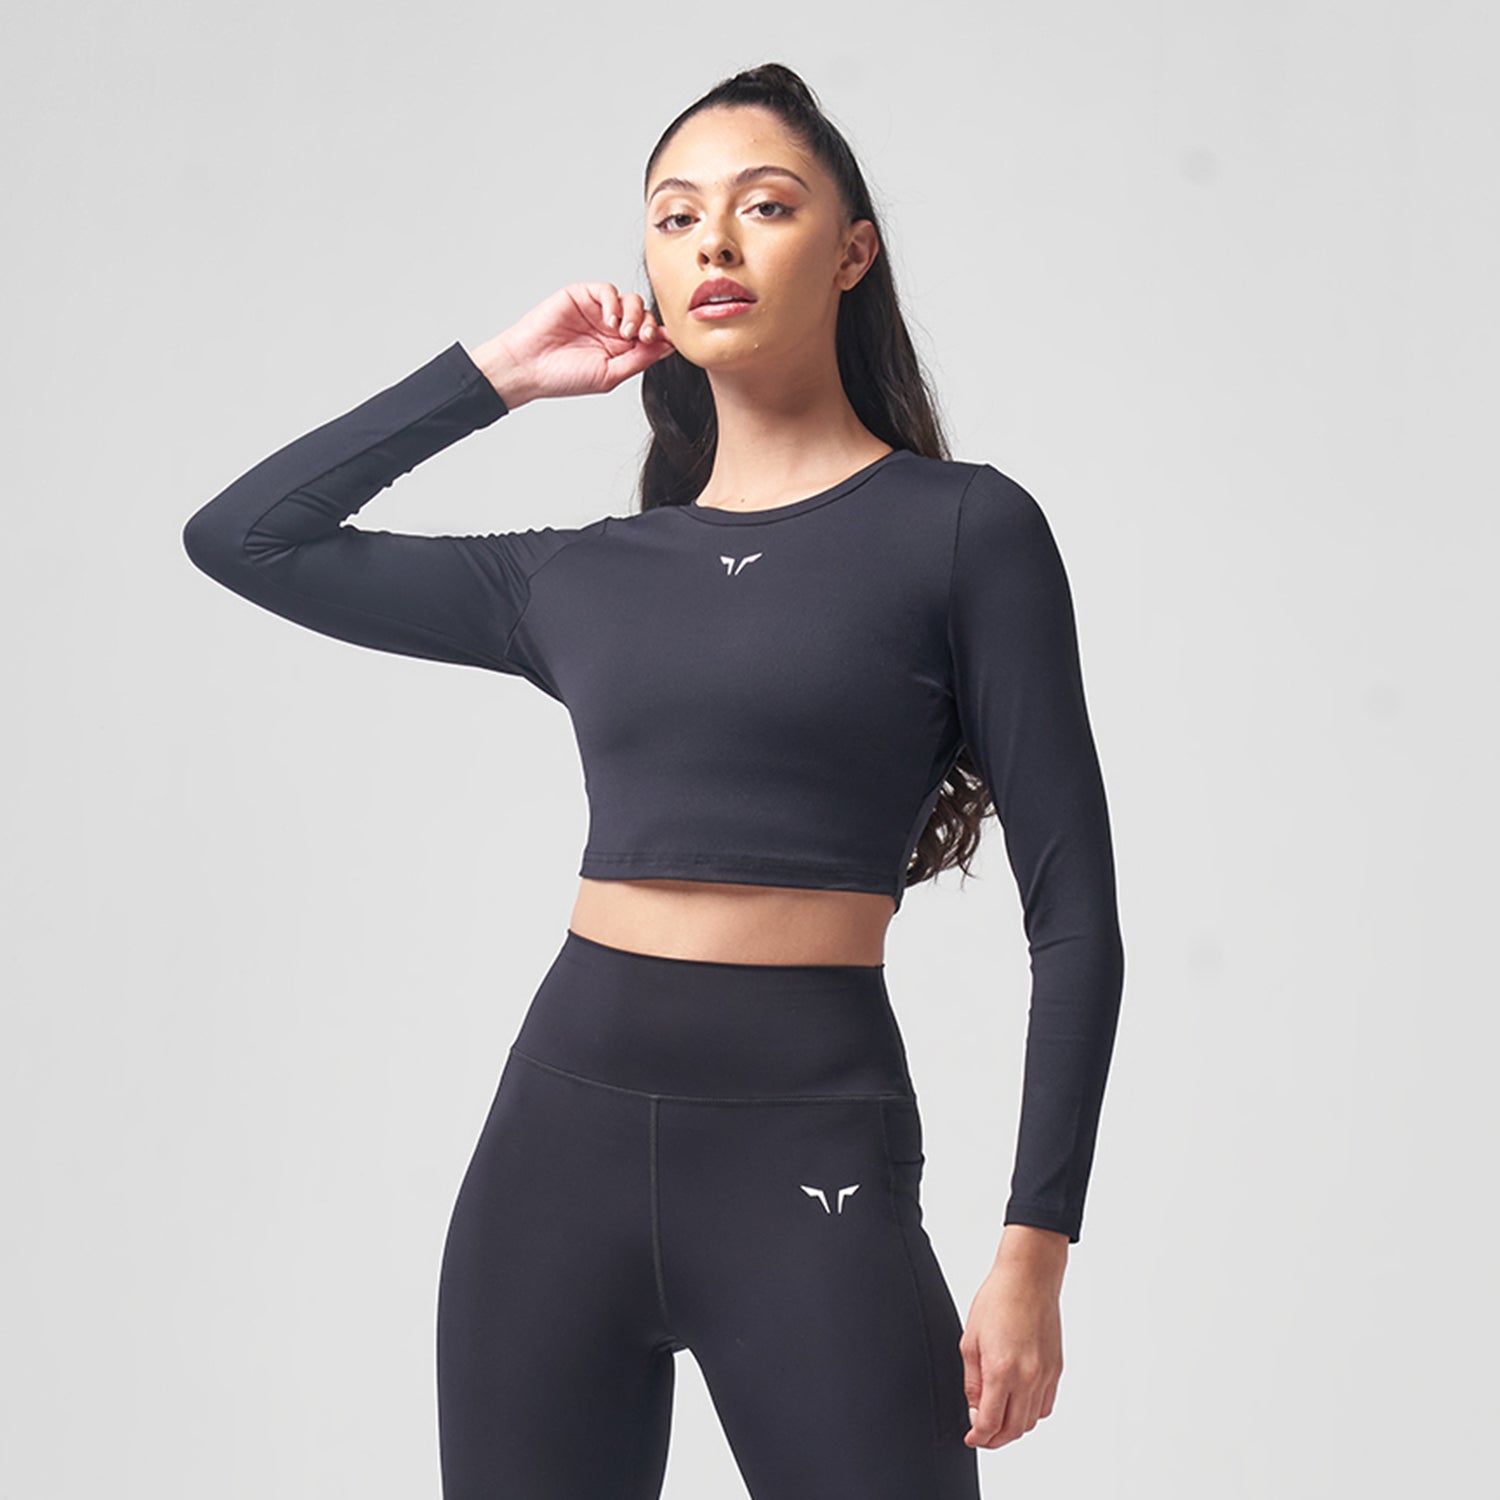 Cropped Long Sleeve Workout Tops